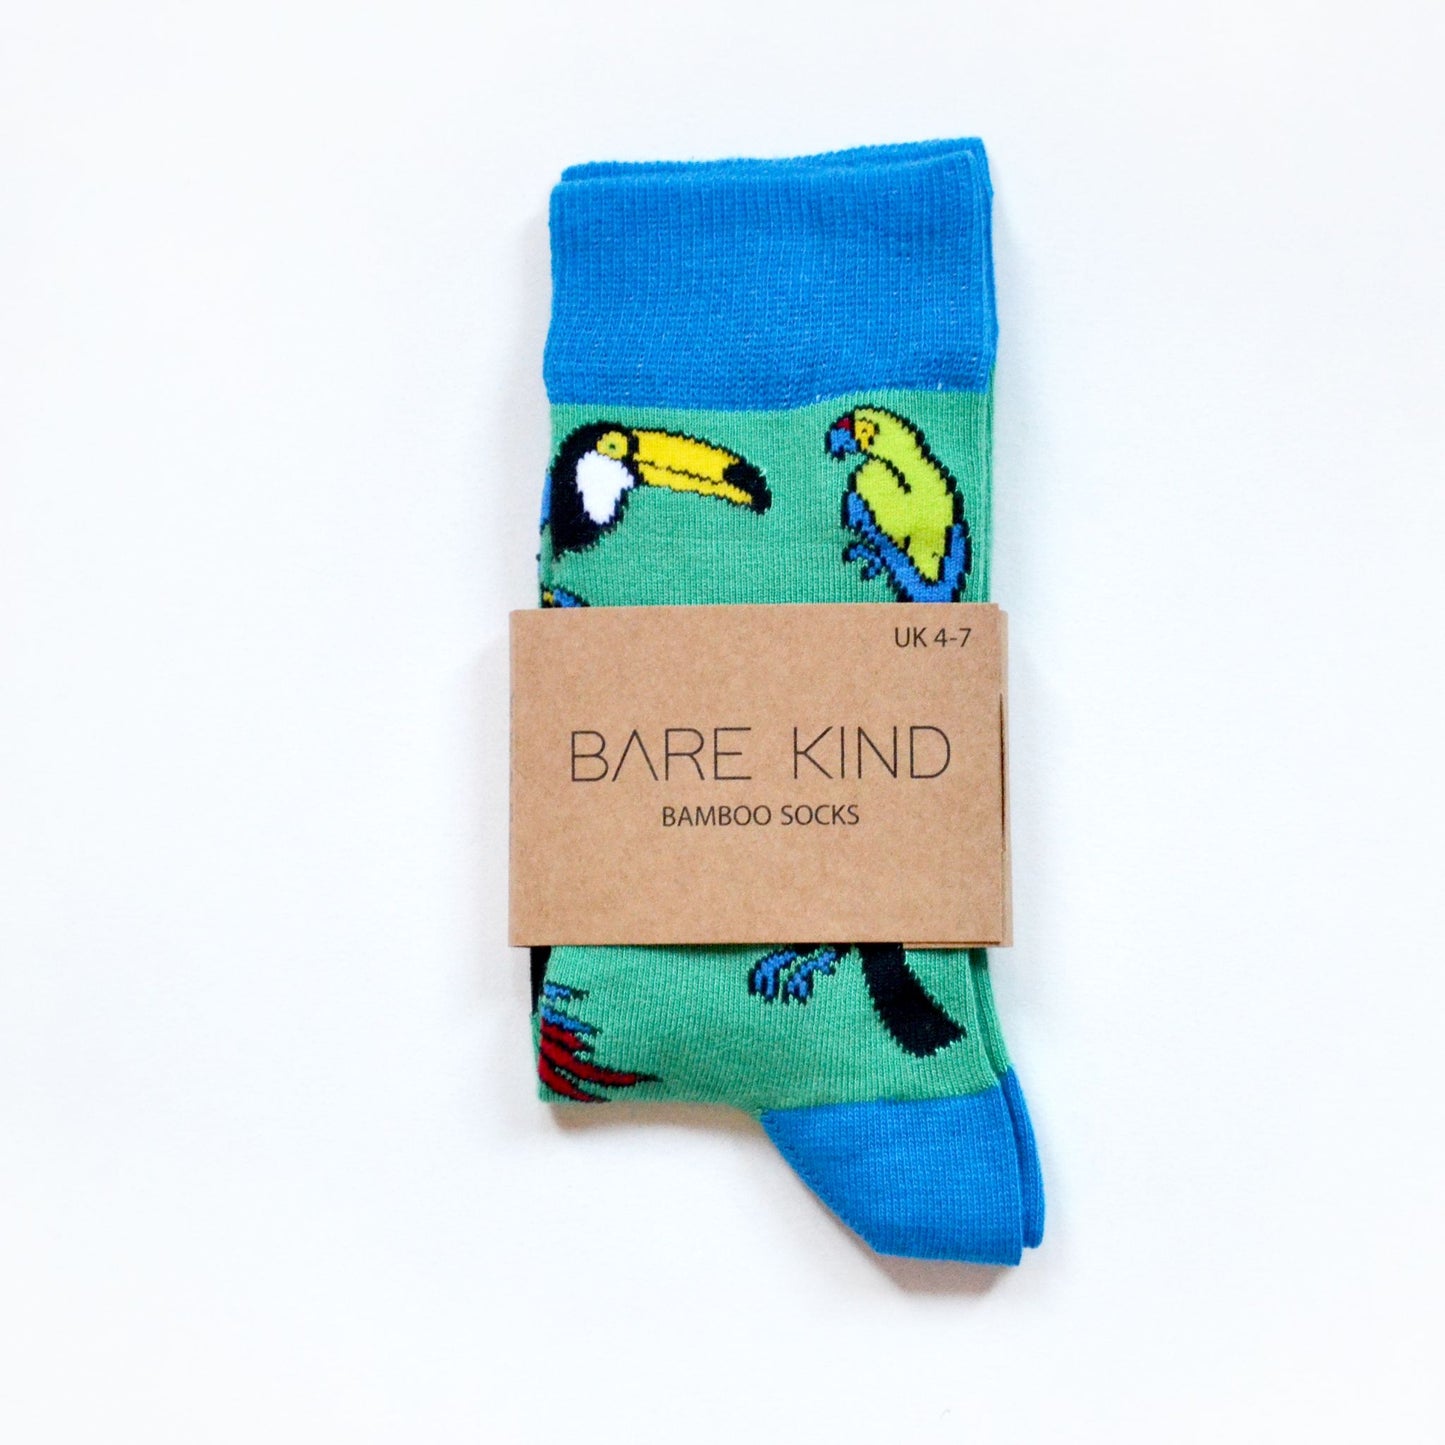 Toucan Socks Taking Care of Toucans - in recycled packaging